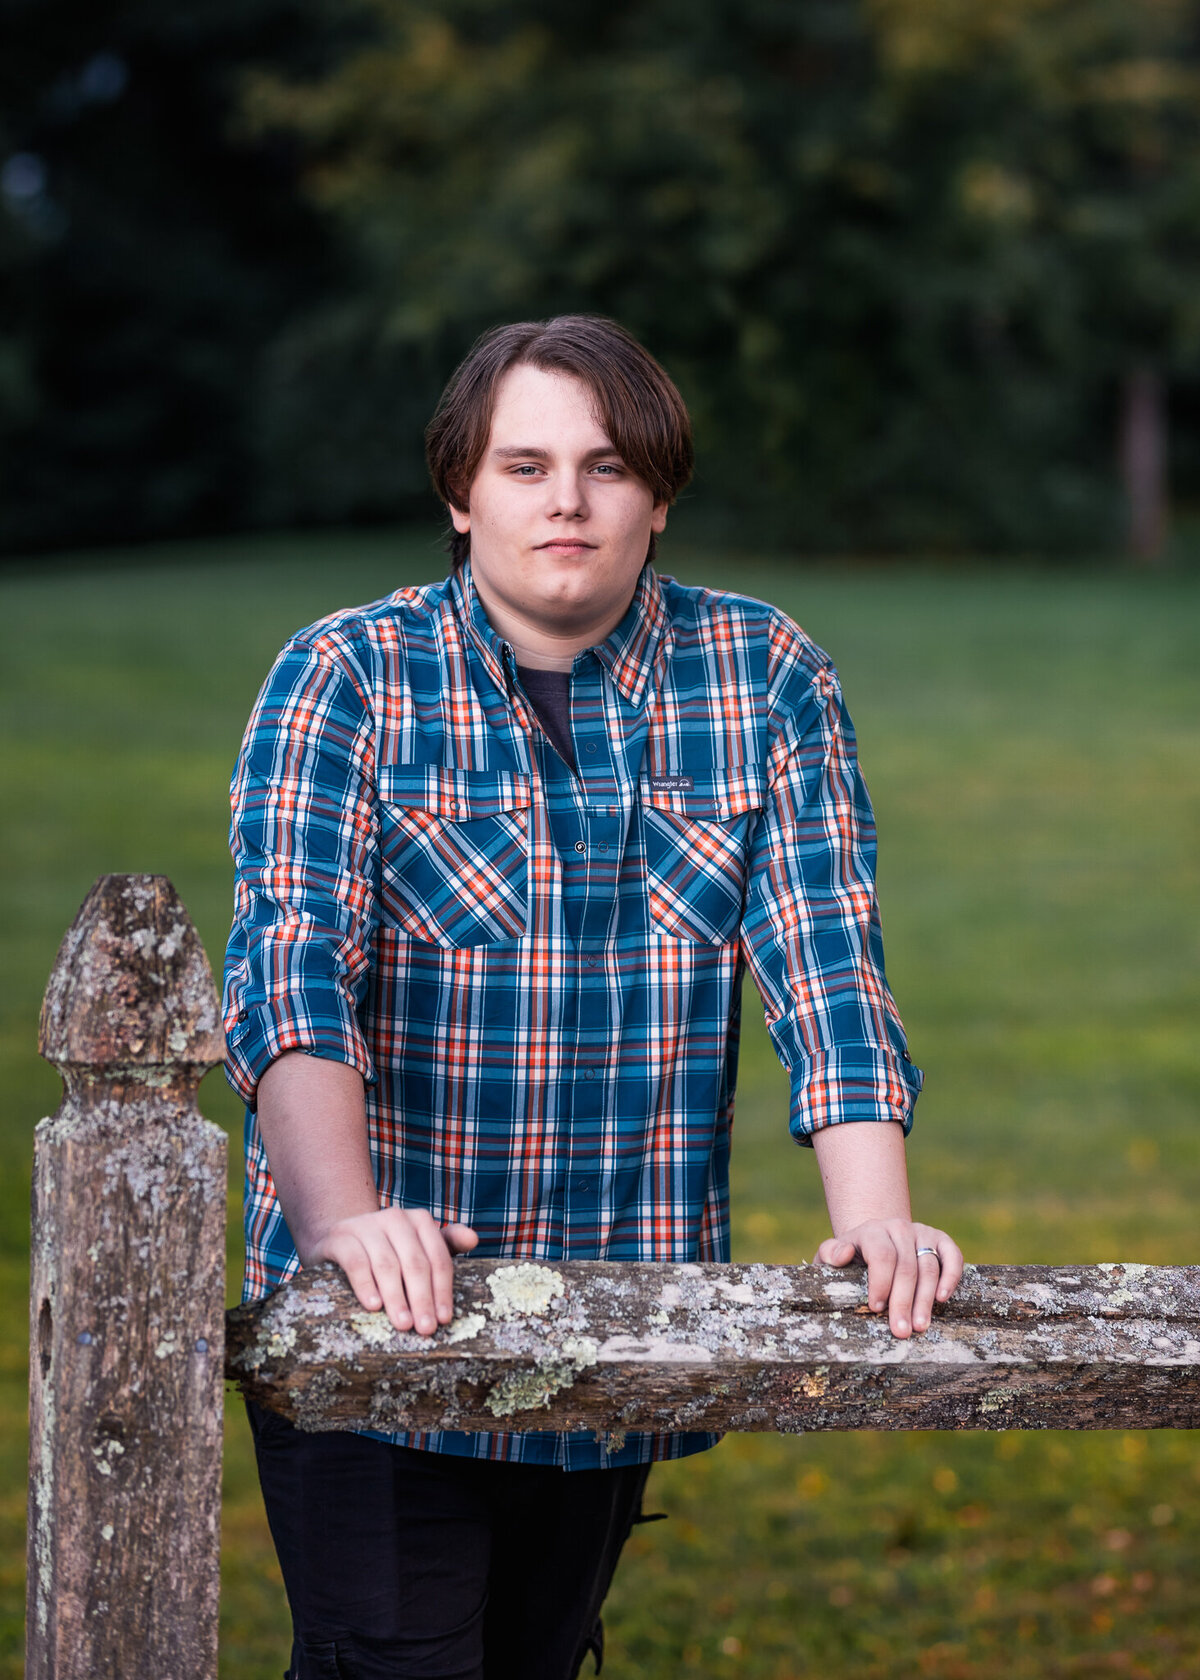 High School Senior Posing for photo behind a fence in greely park in nashua nh by lisa smith photography